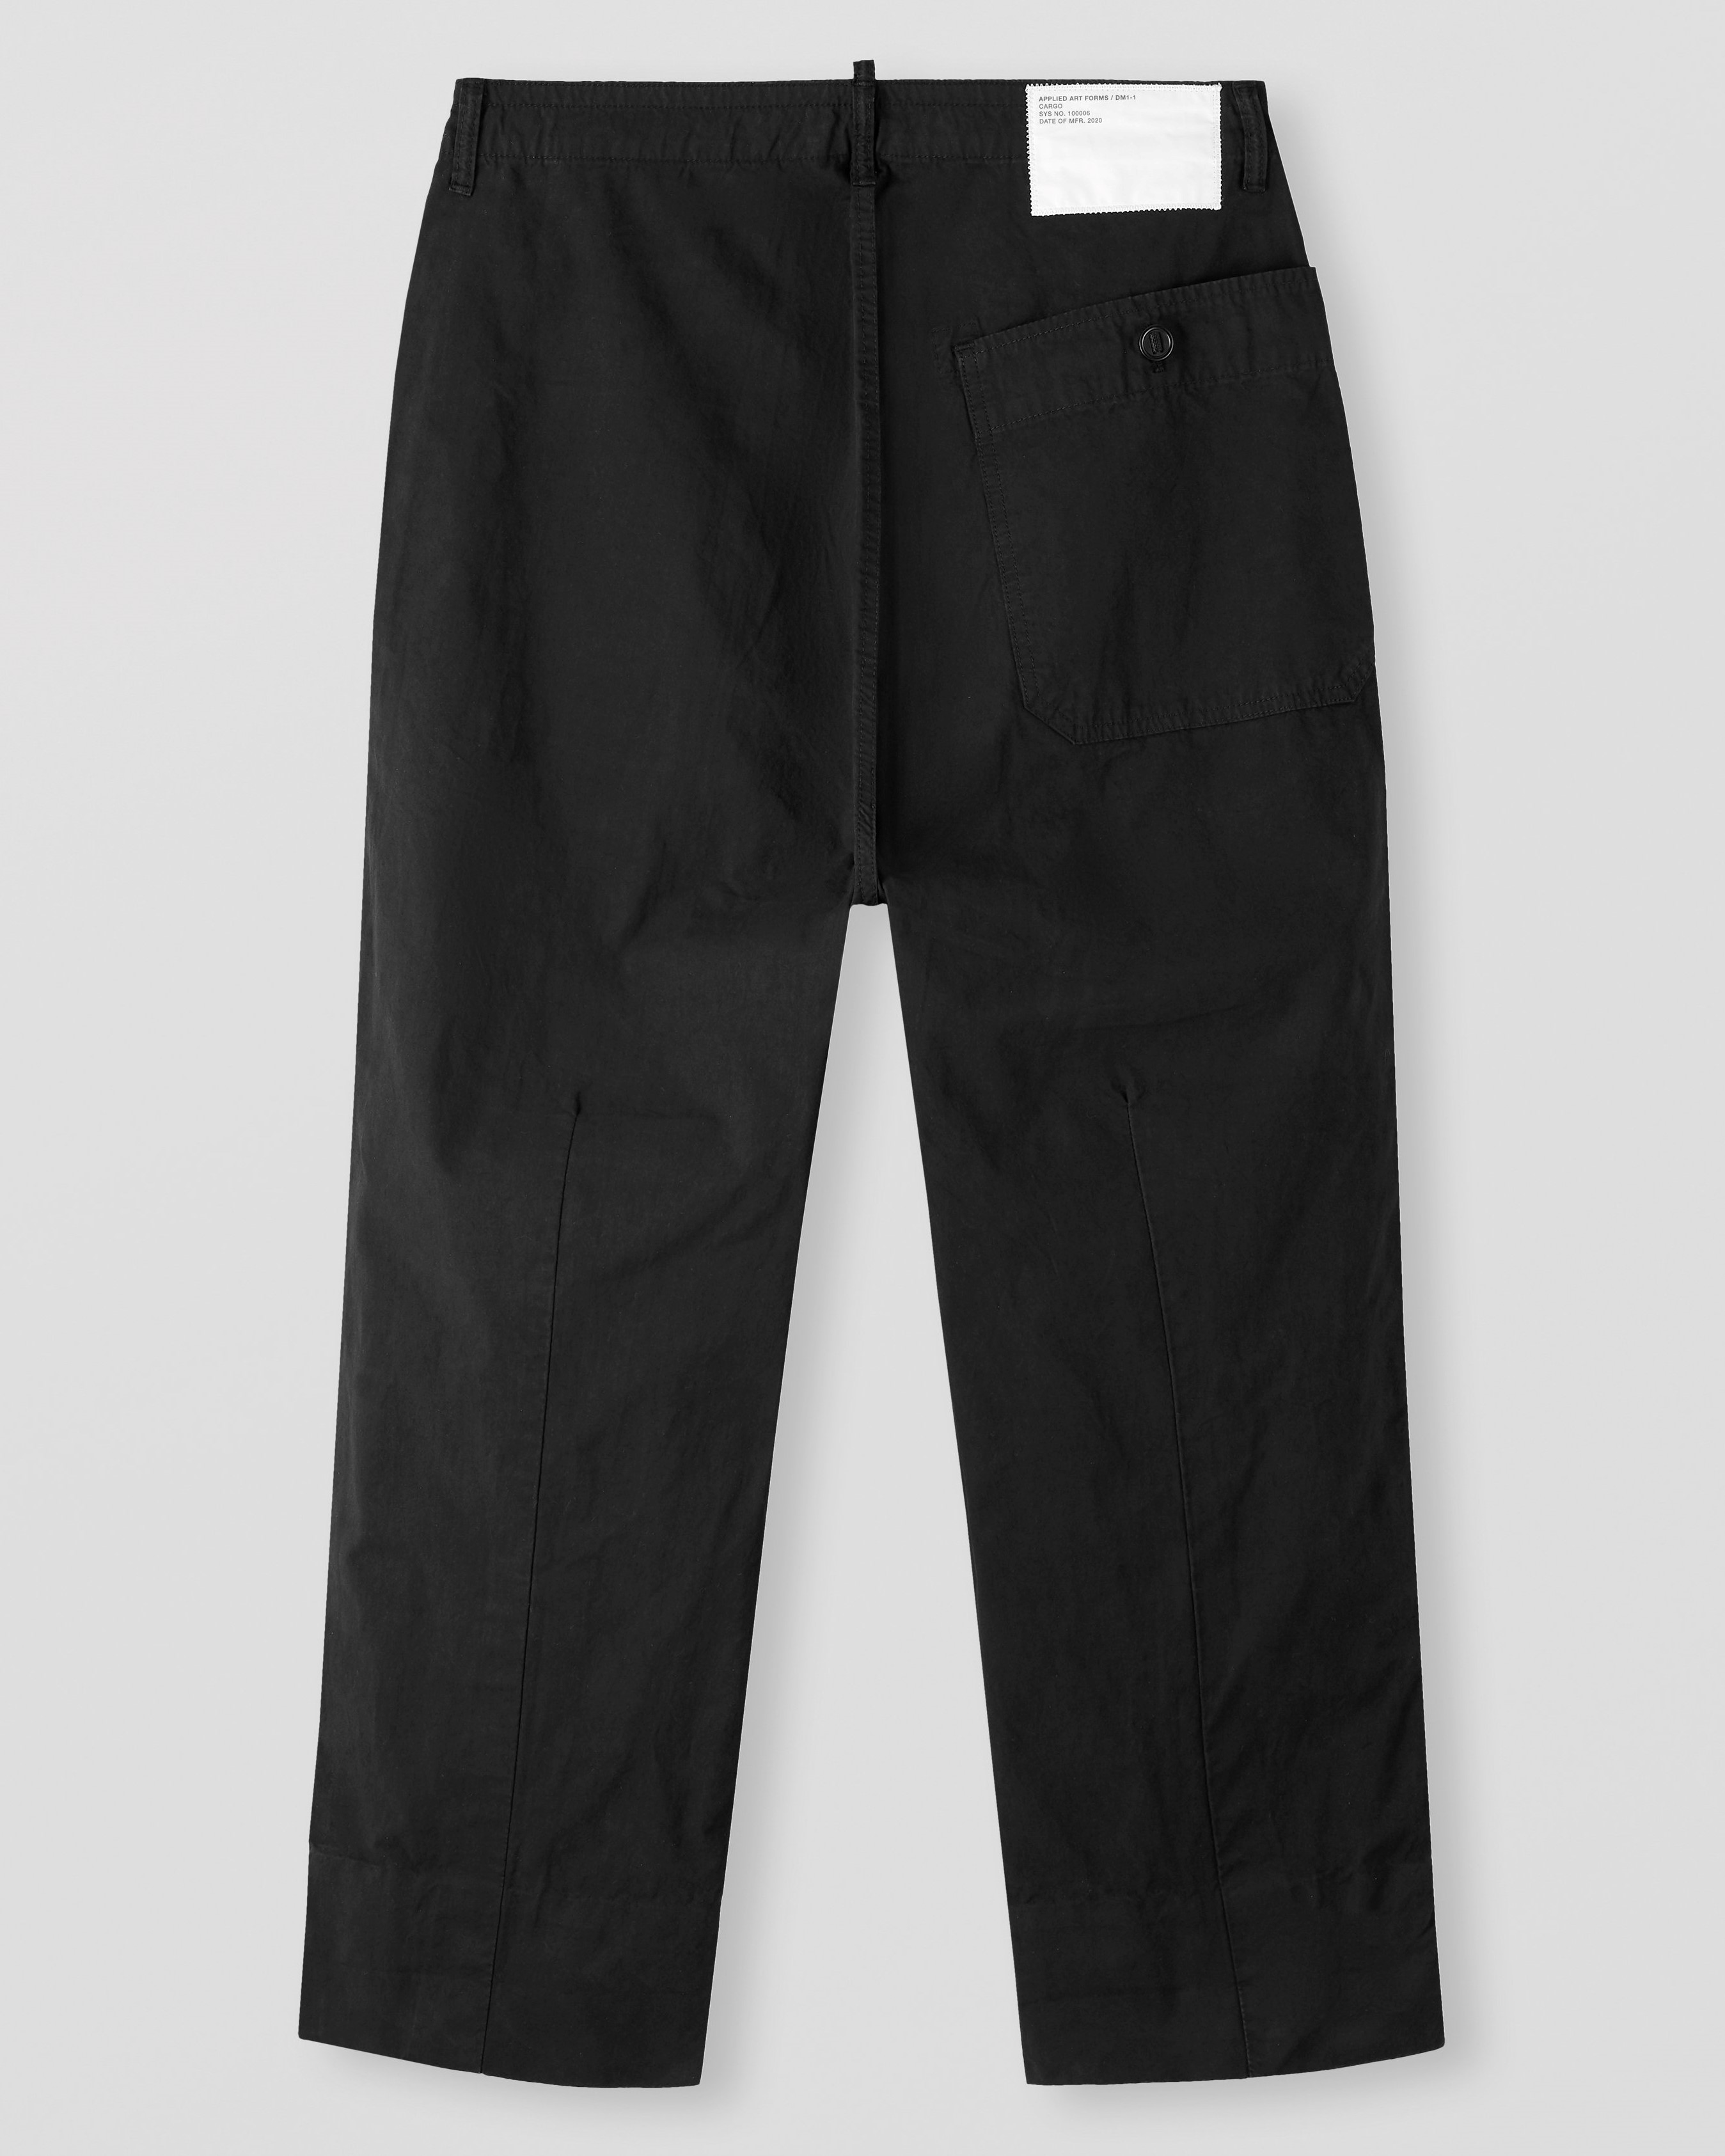 APPLIED ART FORMS Japanese Cargo Pant in Black S